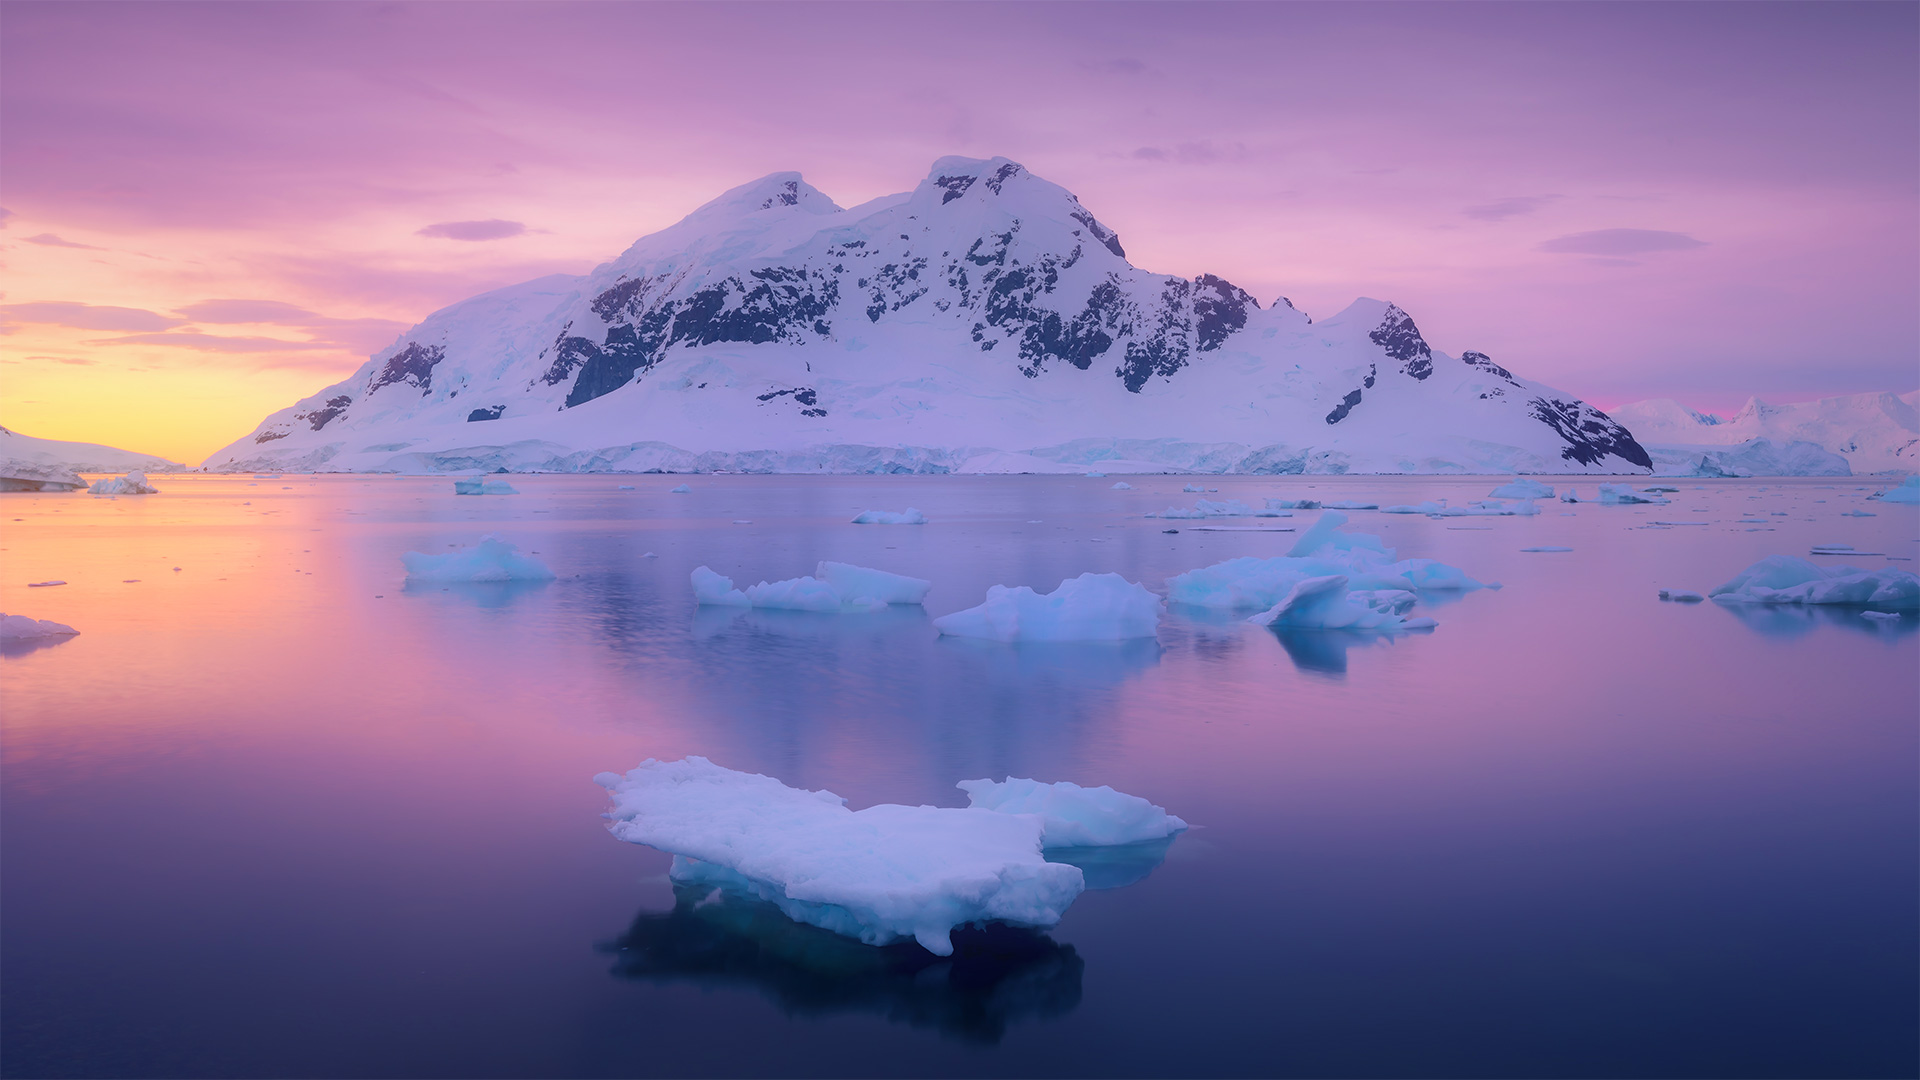 Paradise Harbour, Antarctica - SinghaphanAllB/Getty Images)